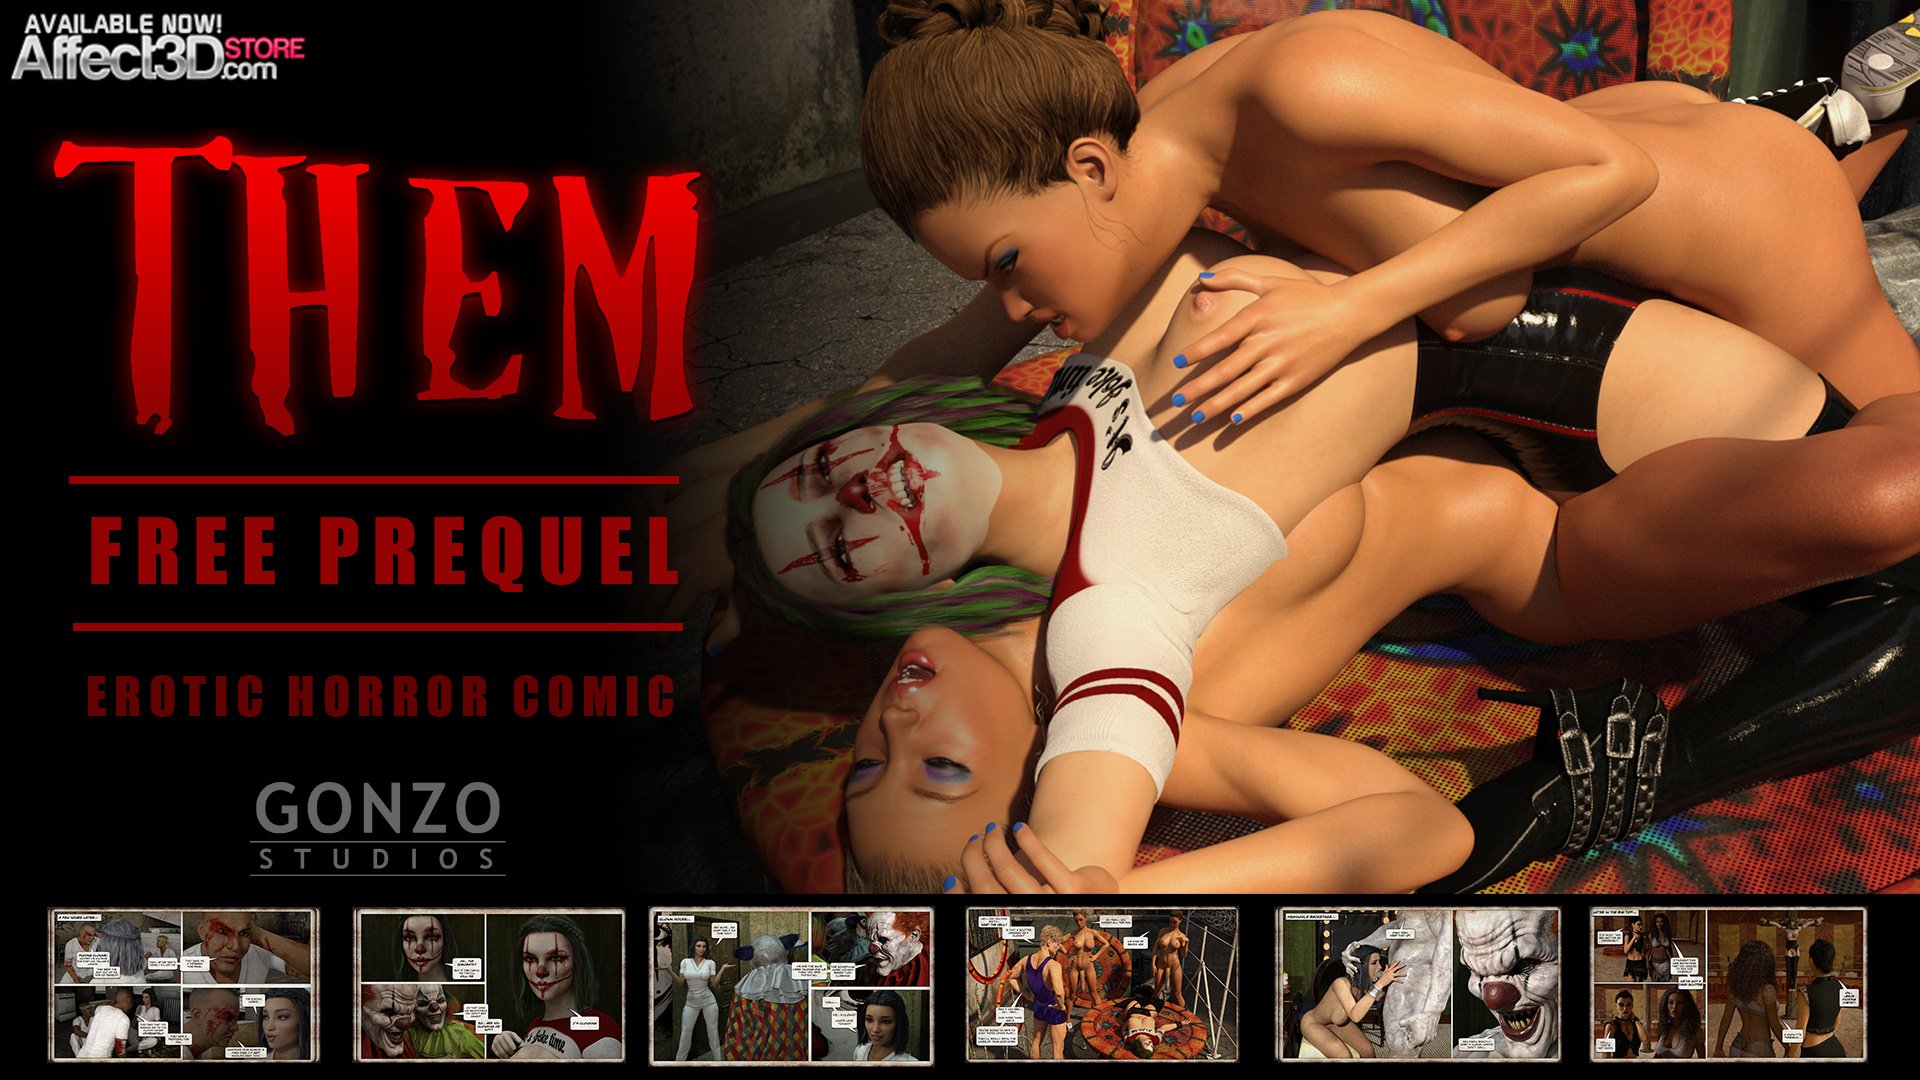 THEM Episode 6 – Season Finale! New Release from Gonzo!